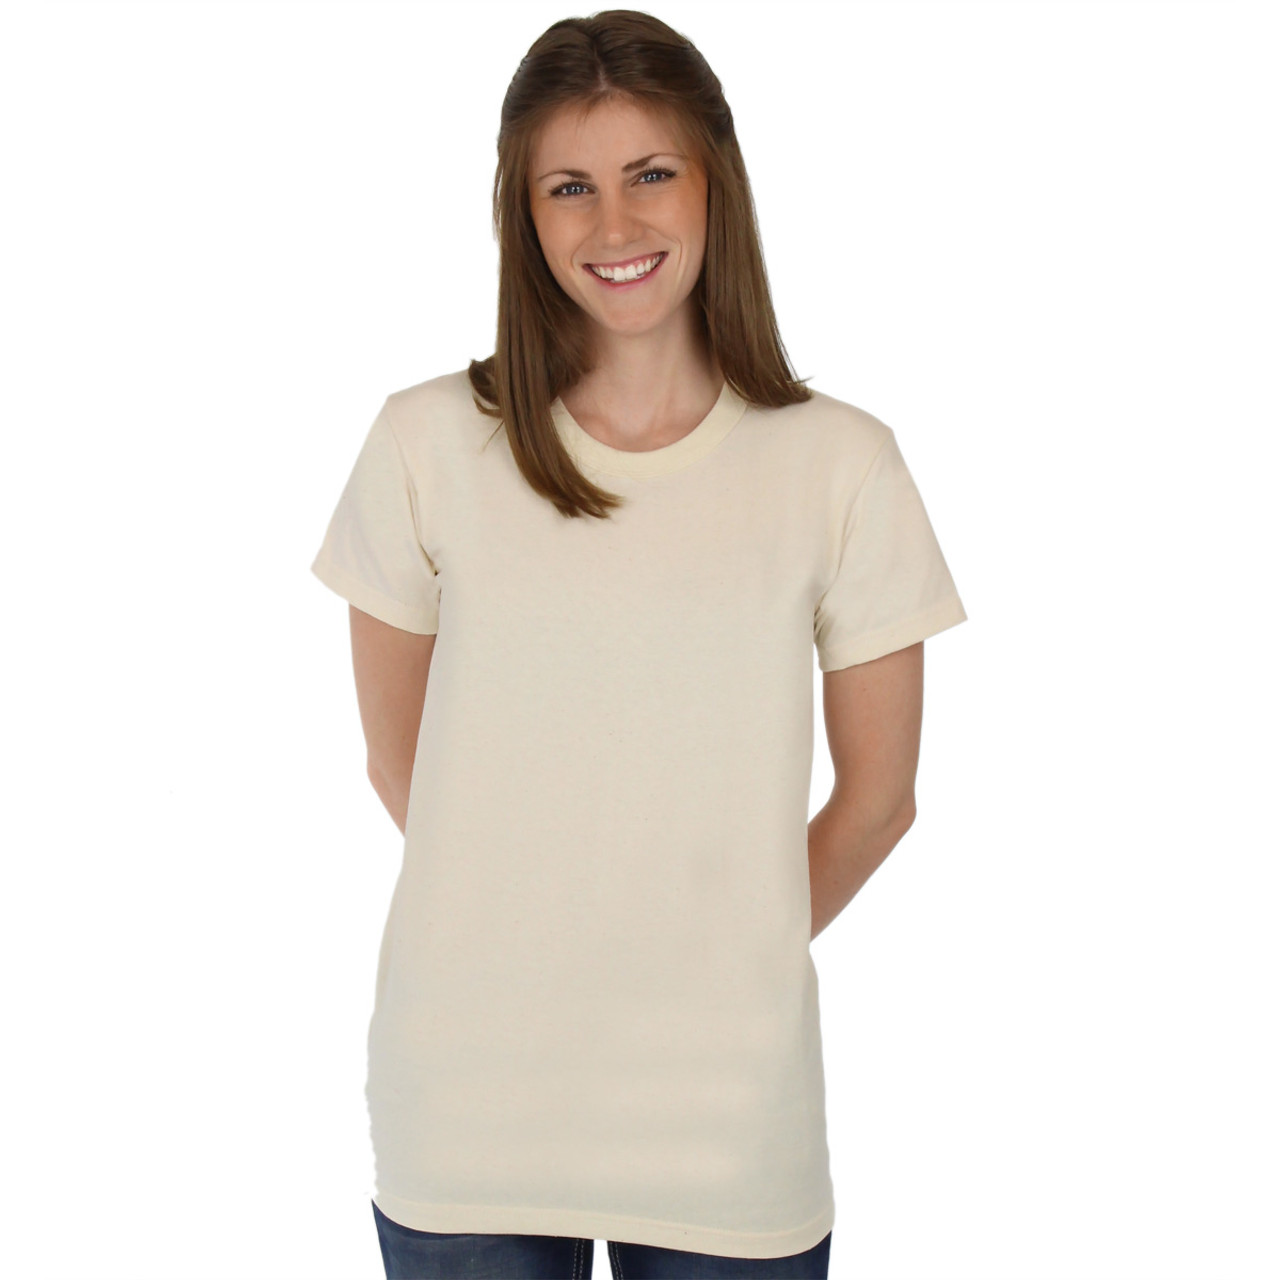 Organic Cotton Tops: T Shirts, Sweaters & More